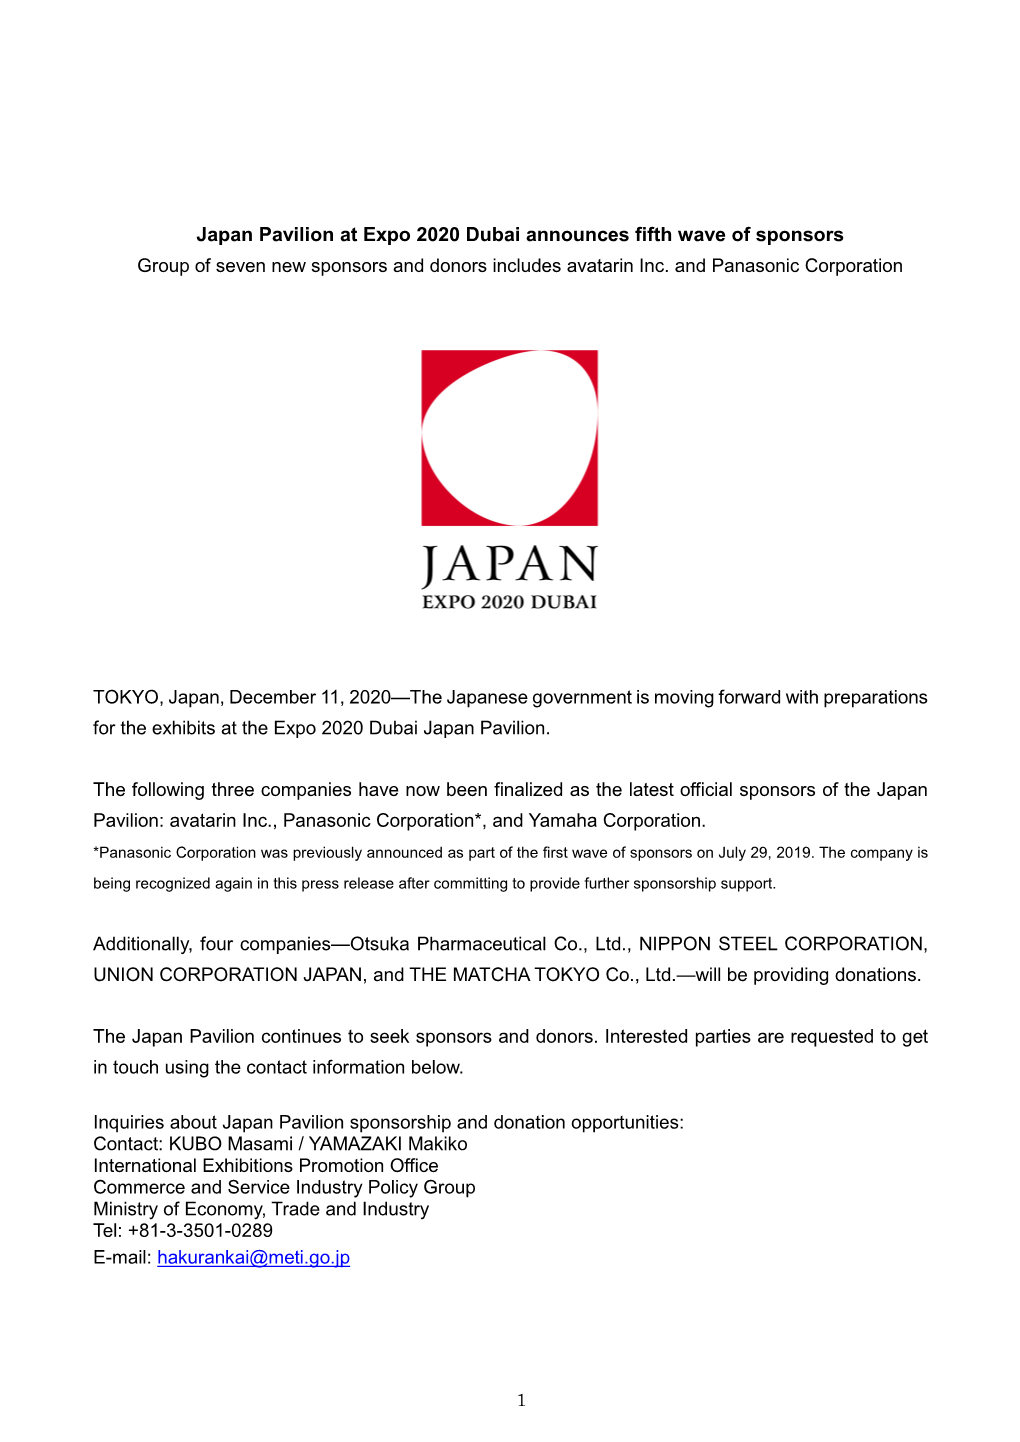 Japan Pavilion at Expo 2020 Dubai Announces Fifth Wave of Sponsors Group of Seven New Sponsors and Donors Includes Avatarin Inc